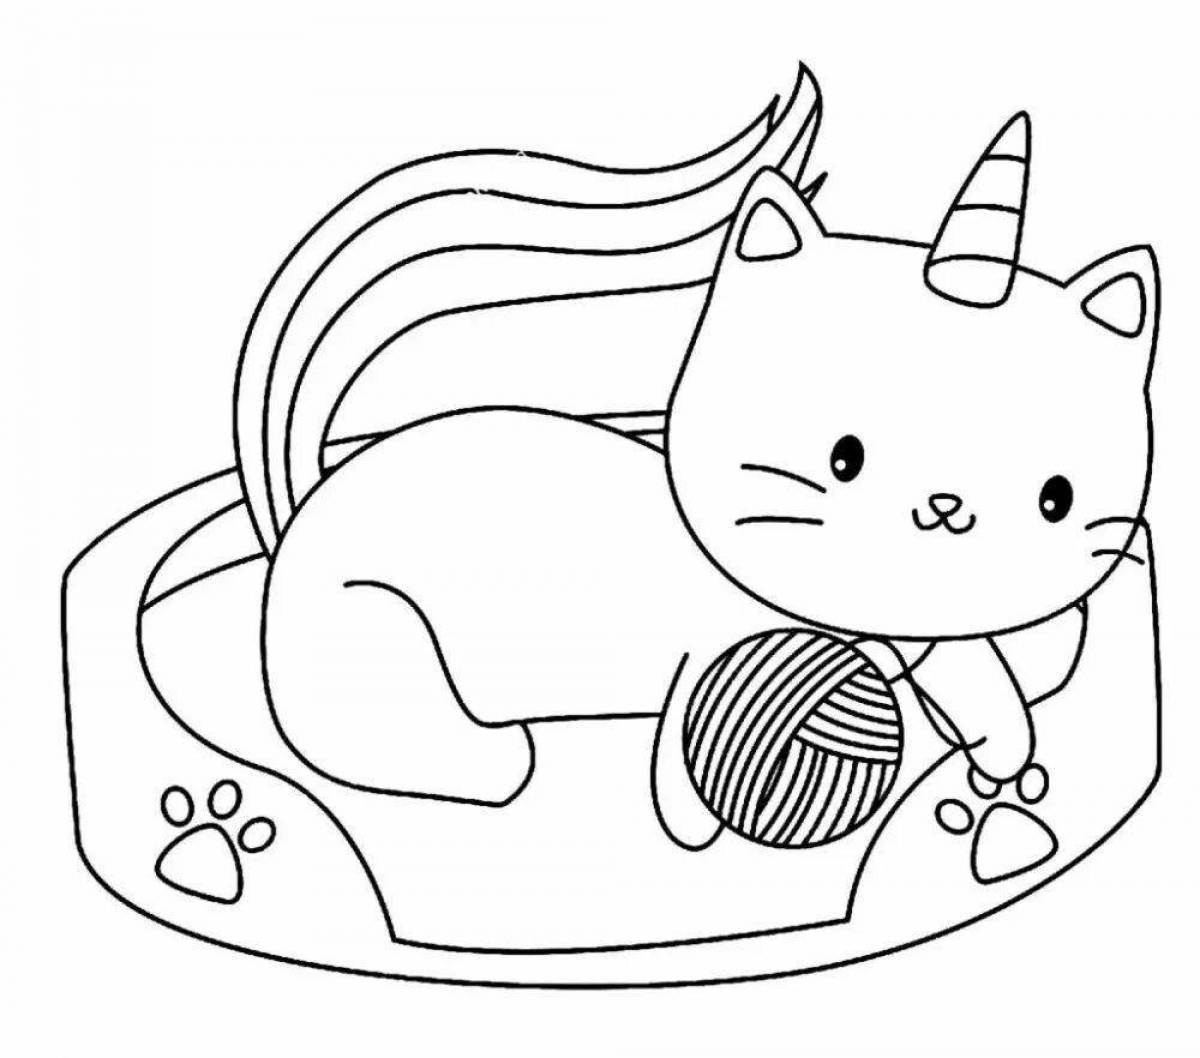 Unicorn pussy glowing coloring book